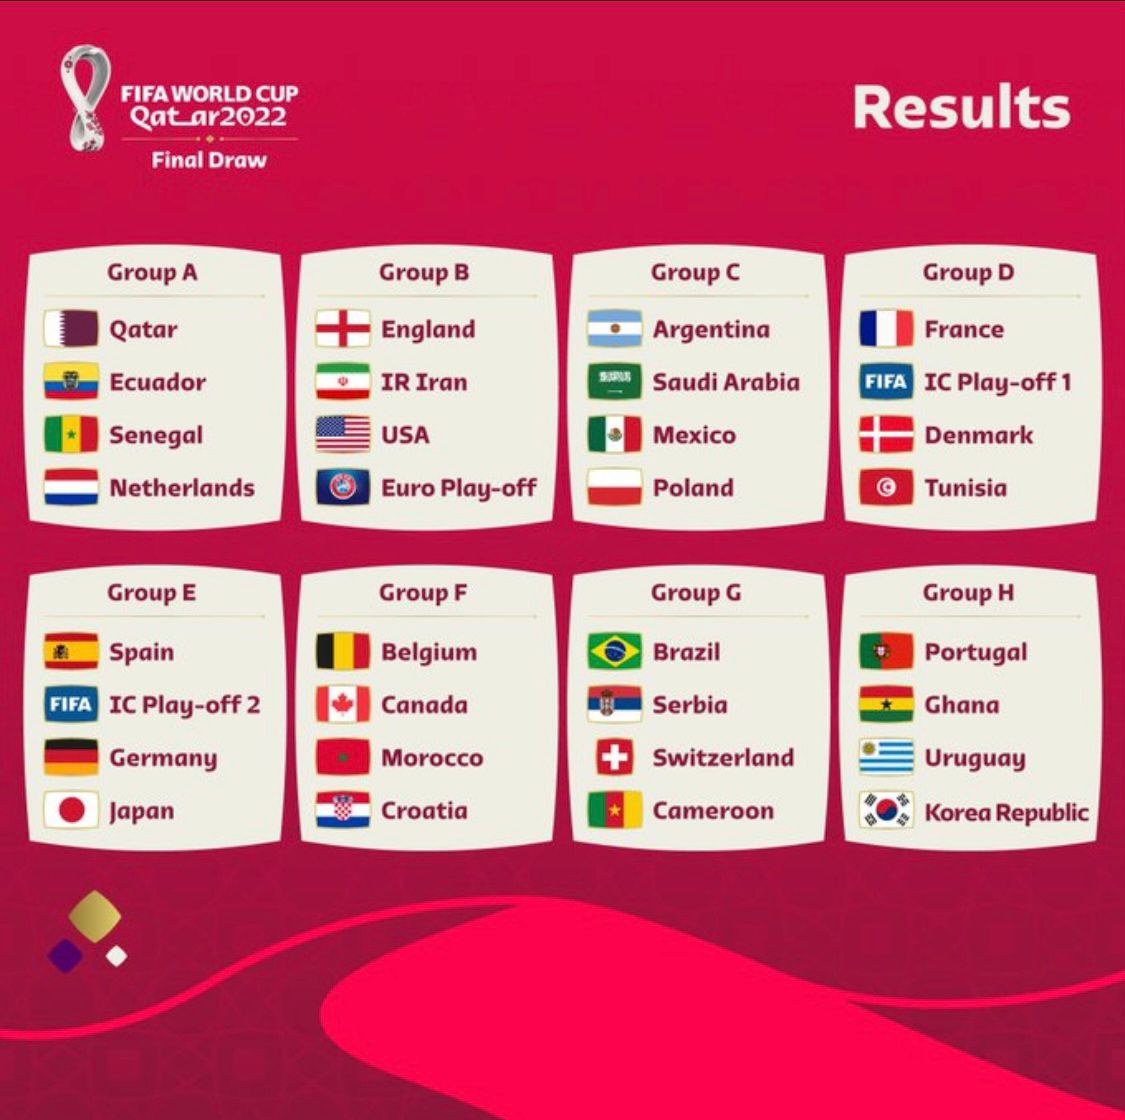 BREAKING: Ghana Drawn Against Portugal, Uruguay And South Korea In Group H of World Cup